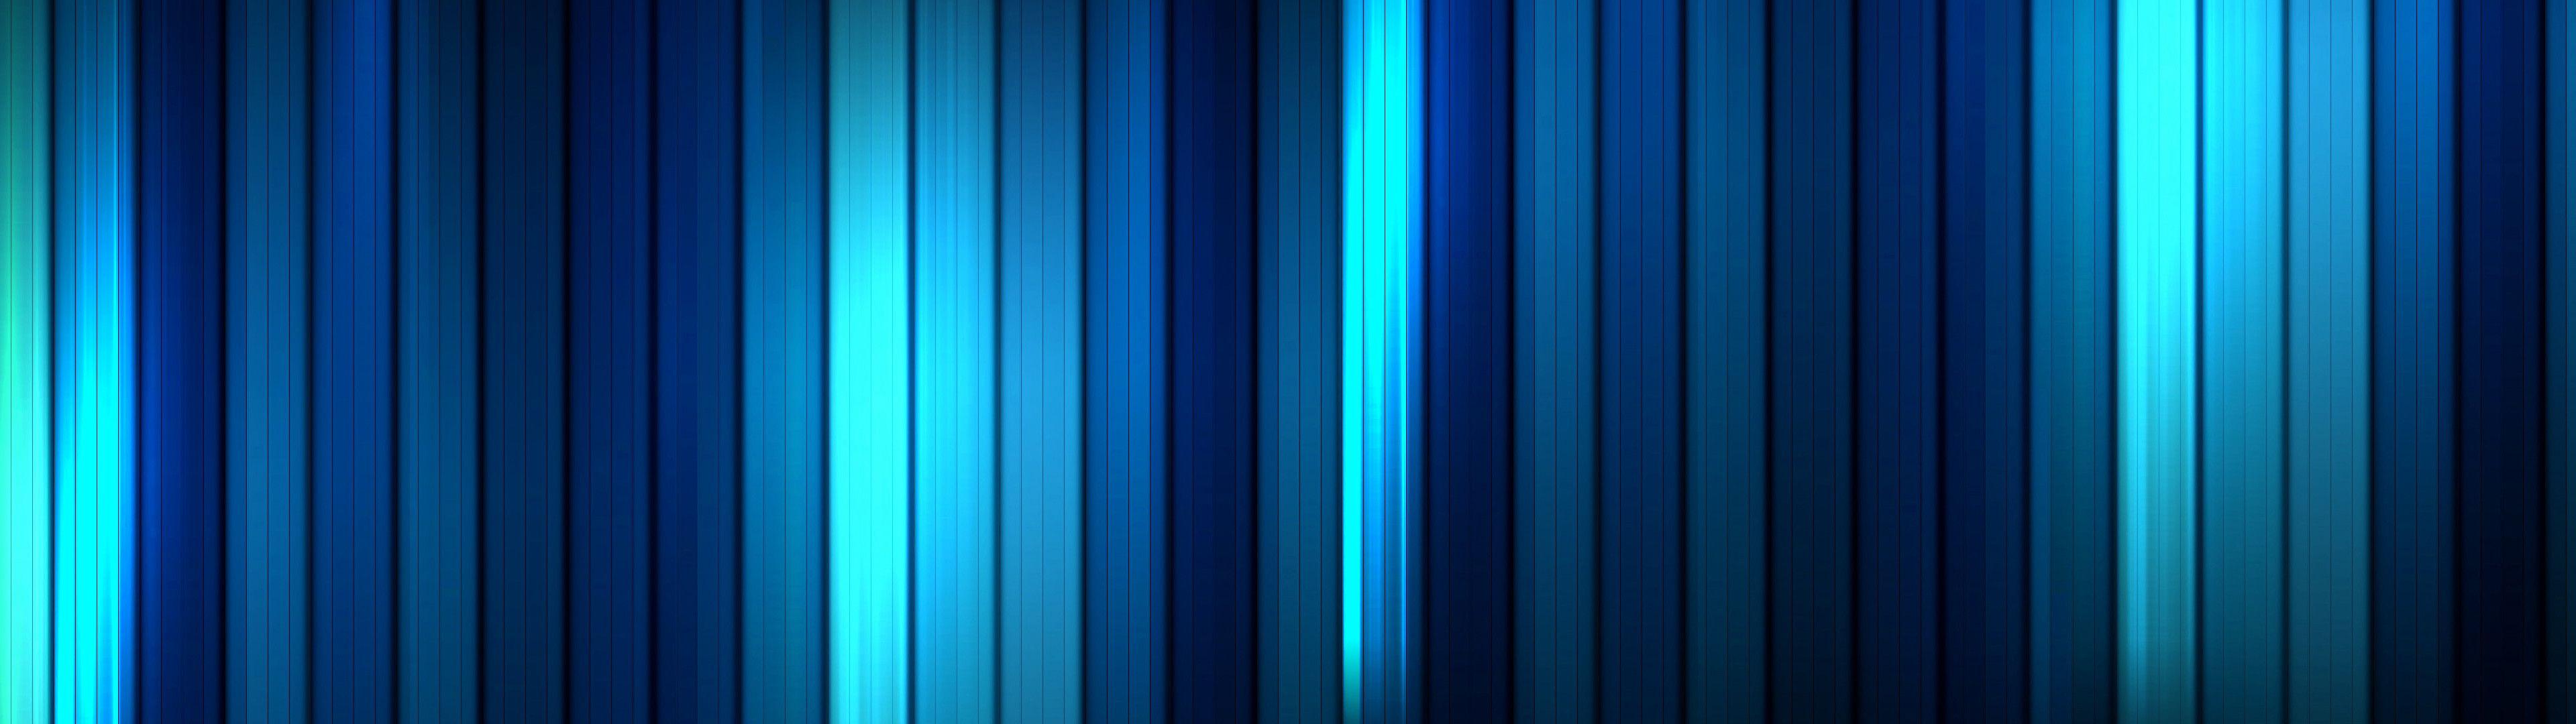 Blue Dual Monitor Wallpapers - Top Free Blue Dual Monitor Backgrounds